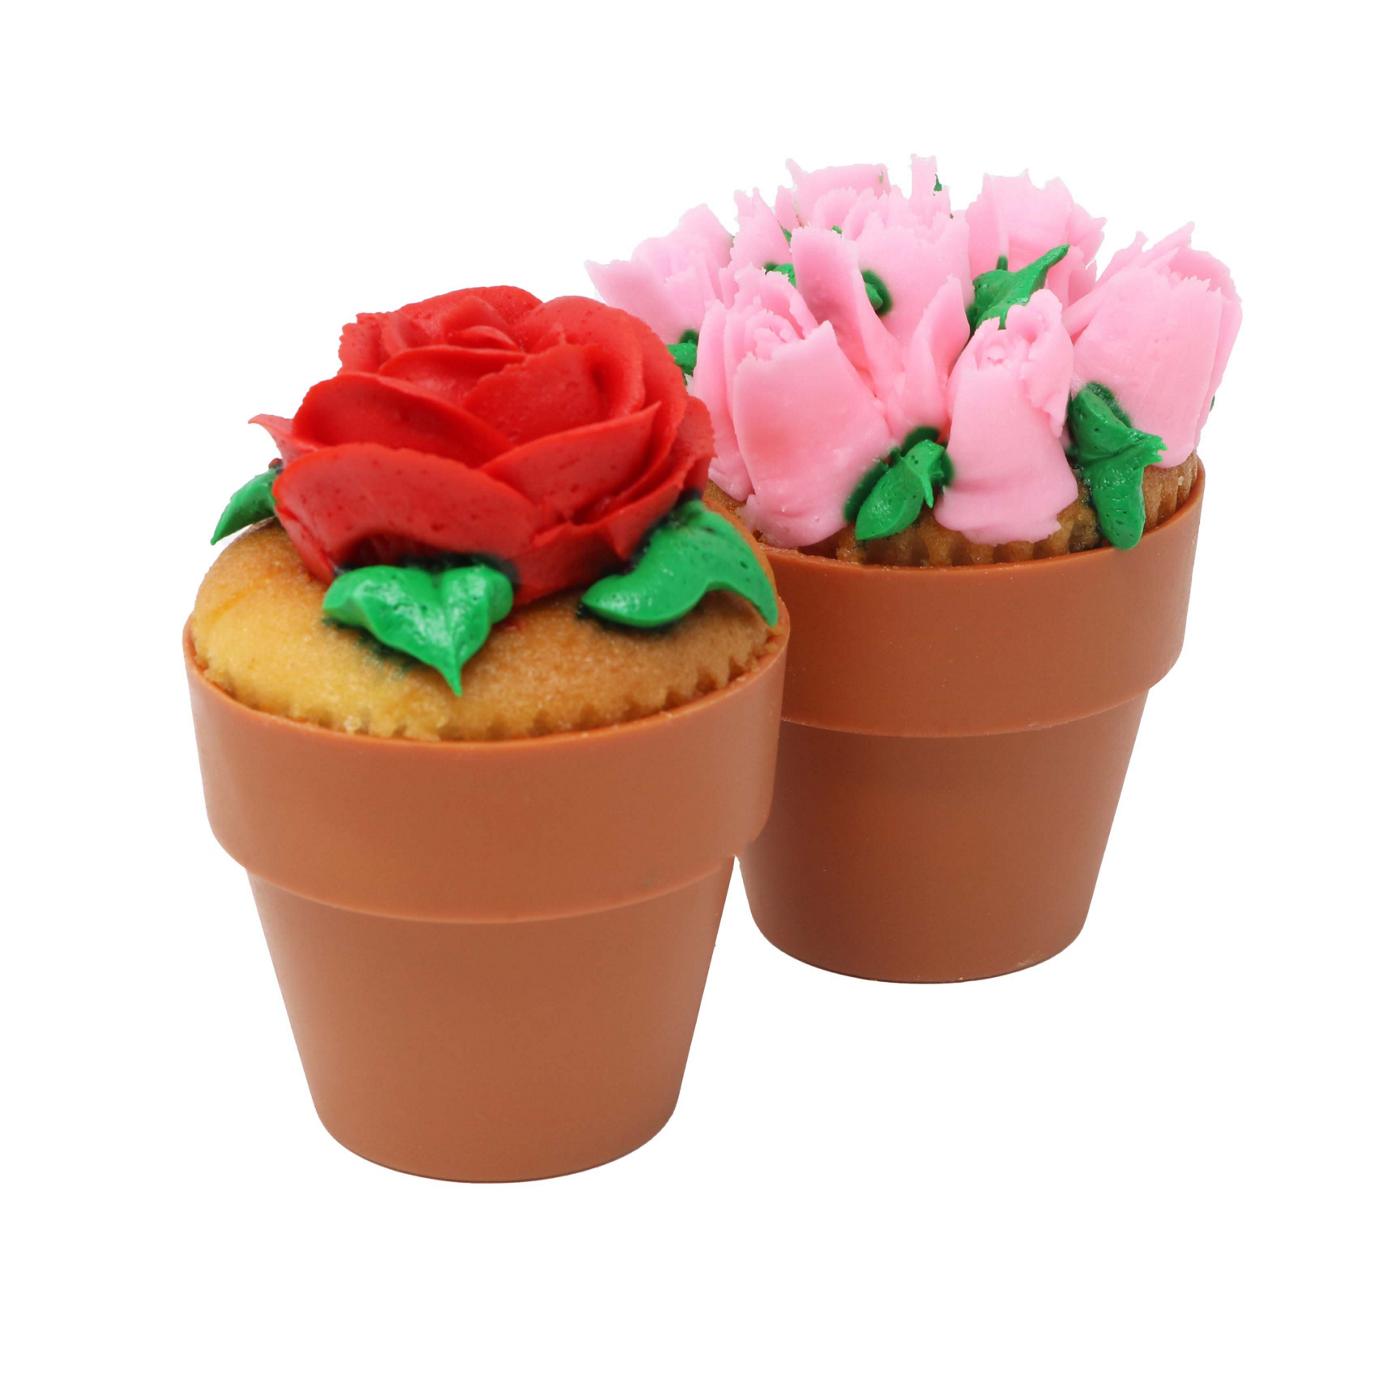 H-E-B White Flower Pot Cupcake with Buttercream Frosting, Floral Designs Vary; image 1 of 2